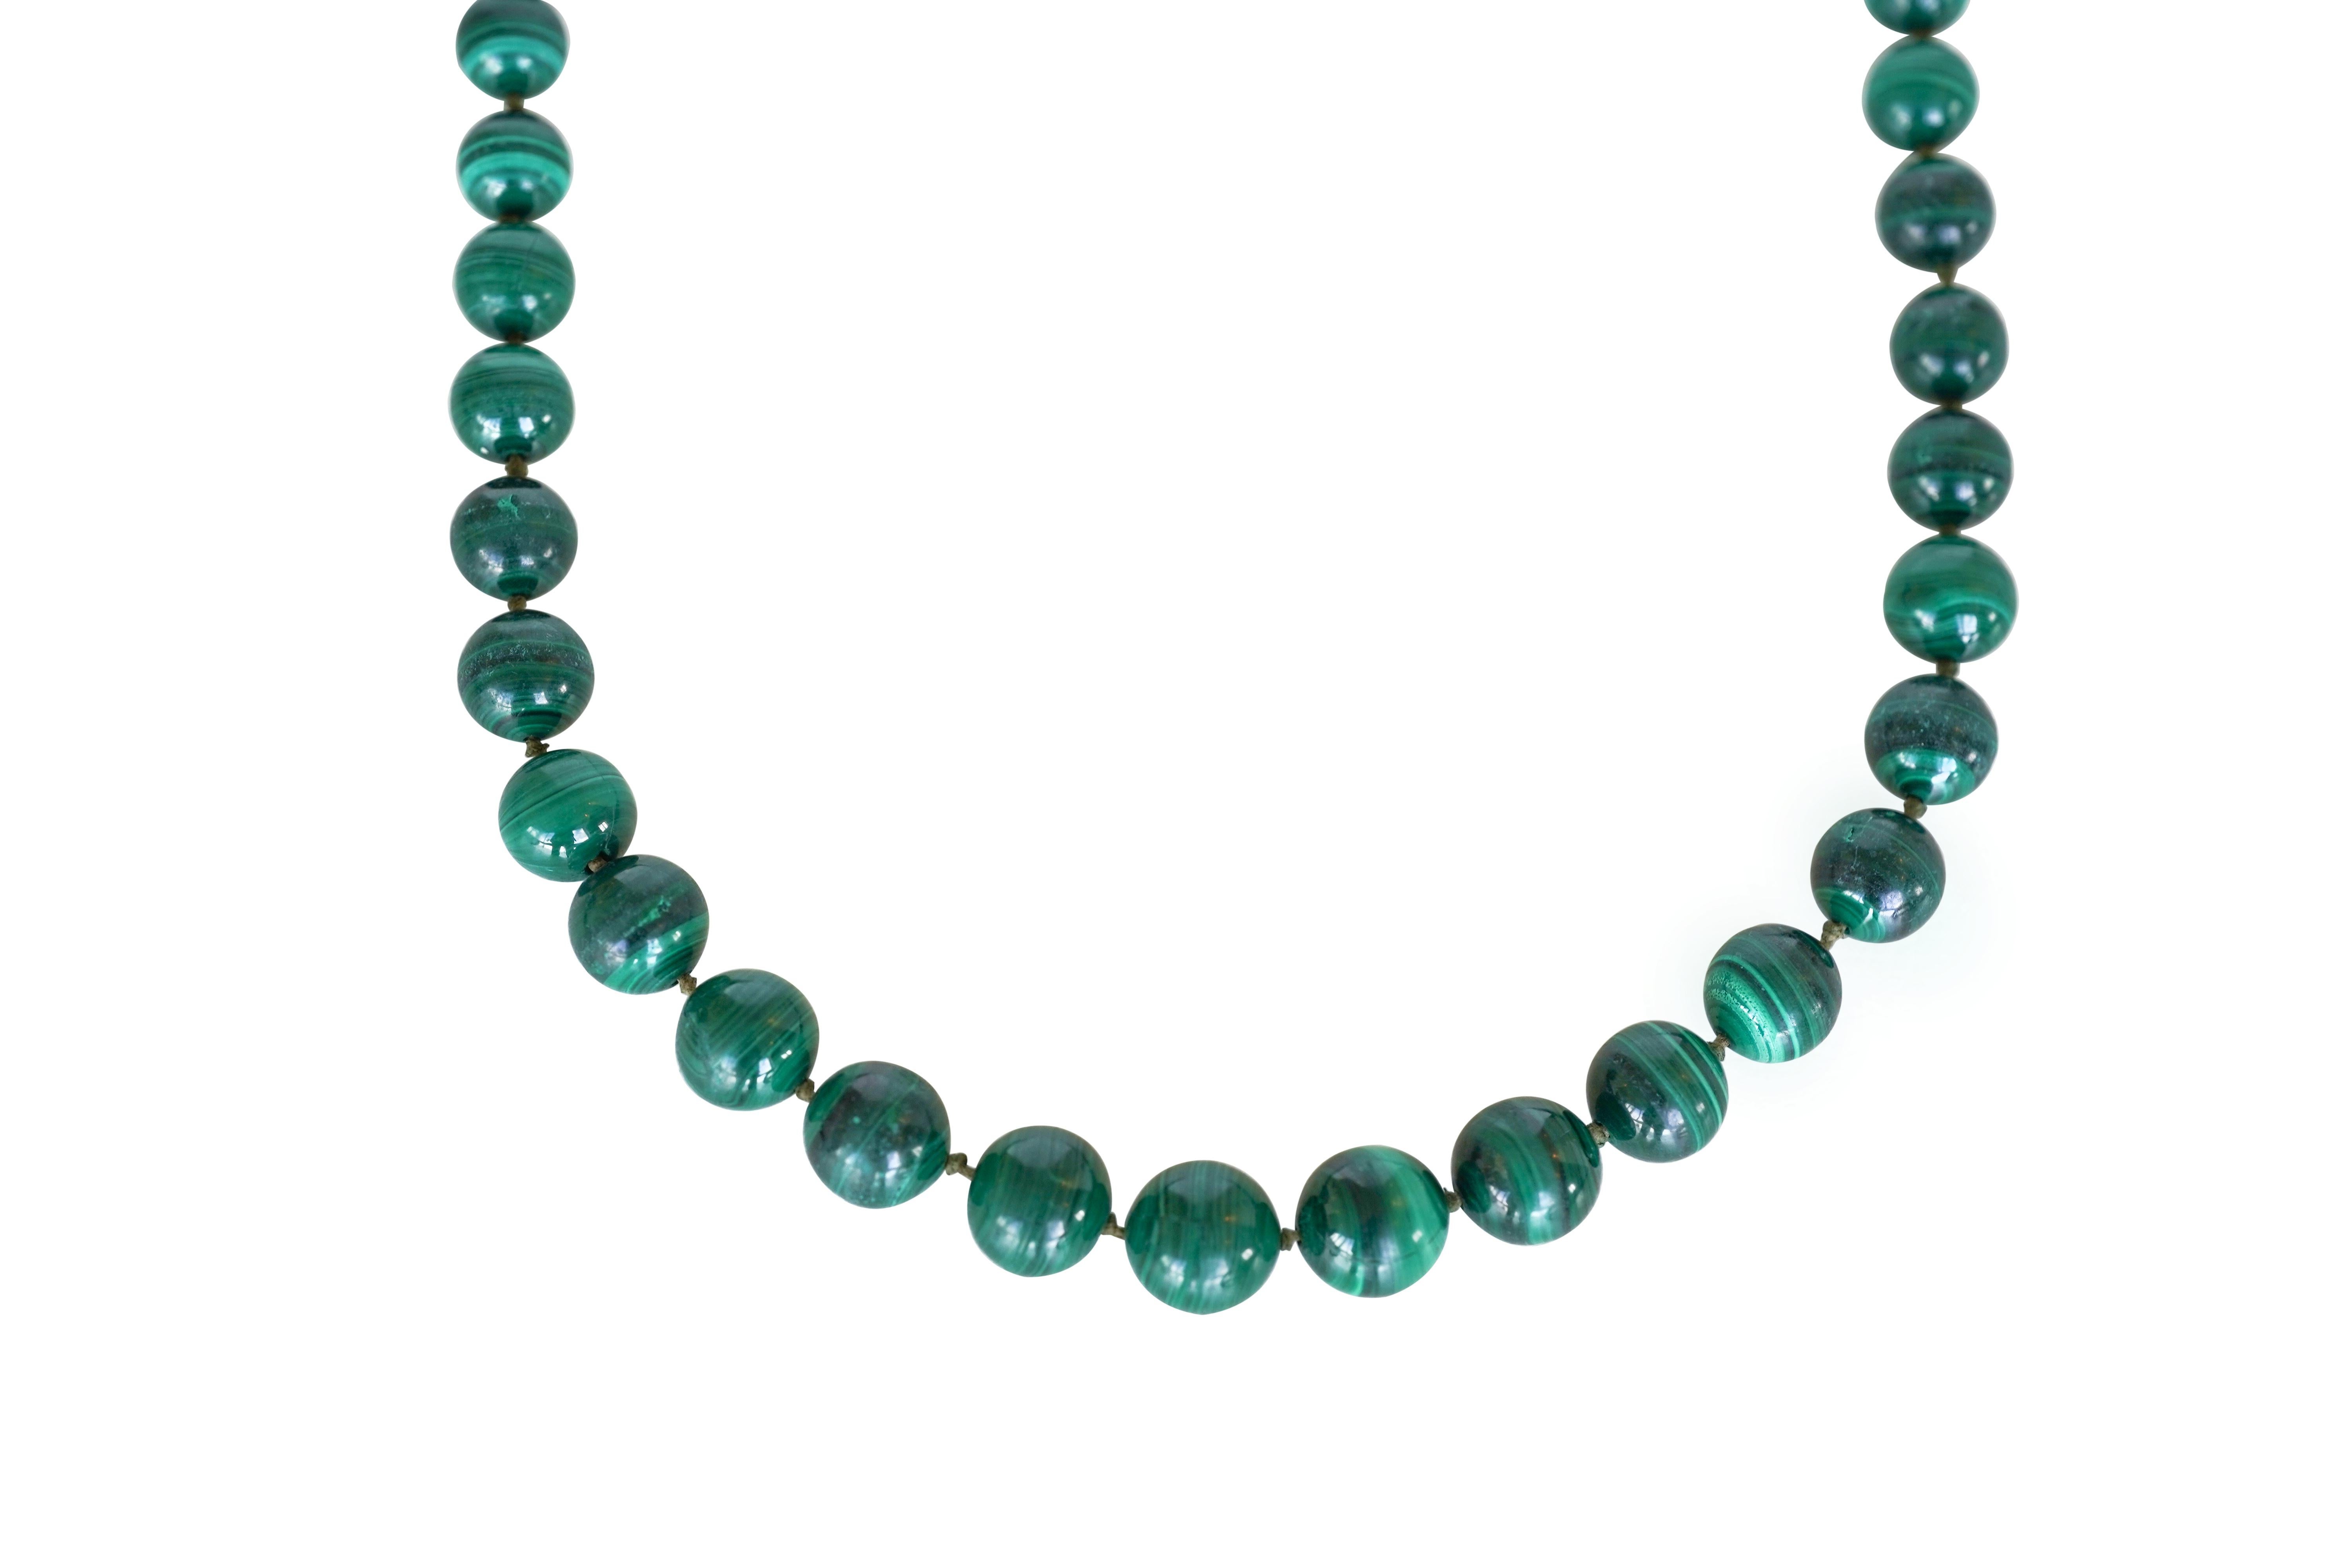 Natural Nearly Round Malachite Beaded Necklace
46 natural near-round malachite stones strung together by nylon thread.
Malachite maximum size: 13.65 mm.
Malachite minimum size: 7.31 mm.
Number of total malachite stones: 46.
Total weight: 146